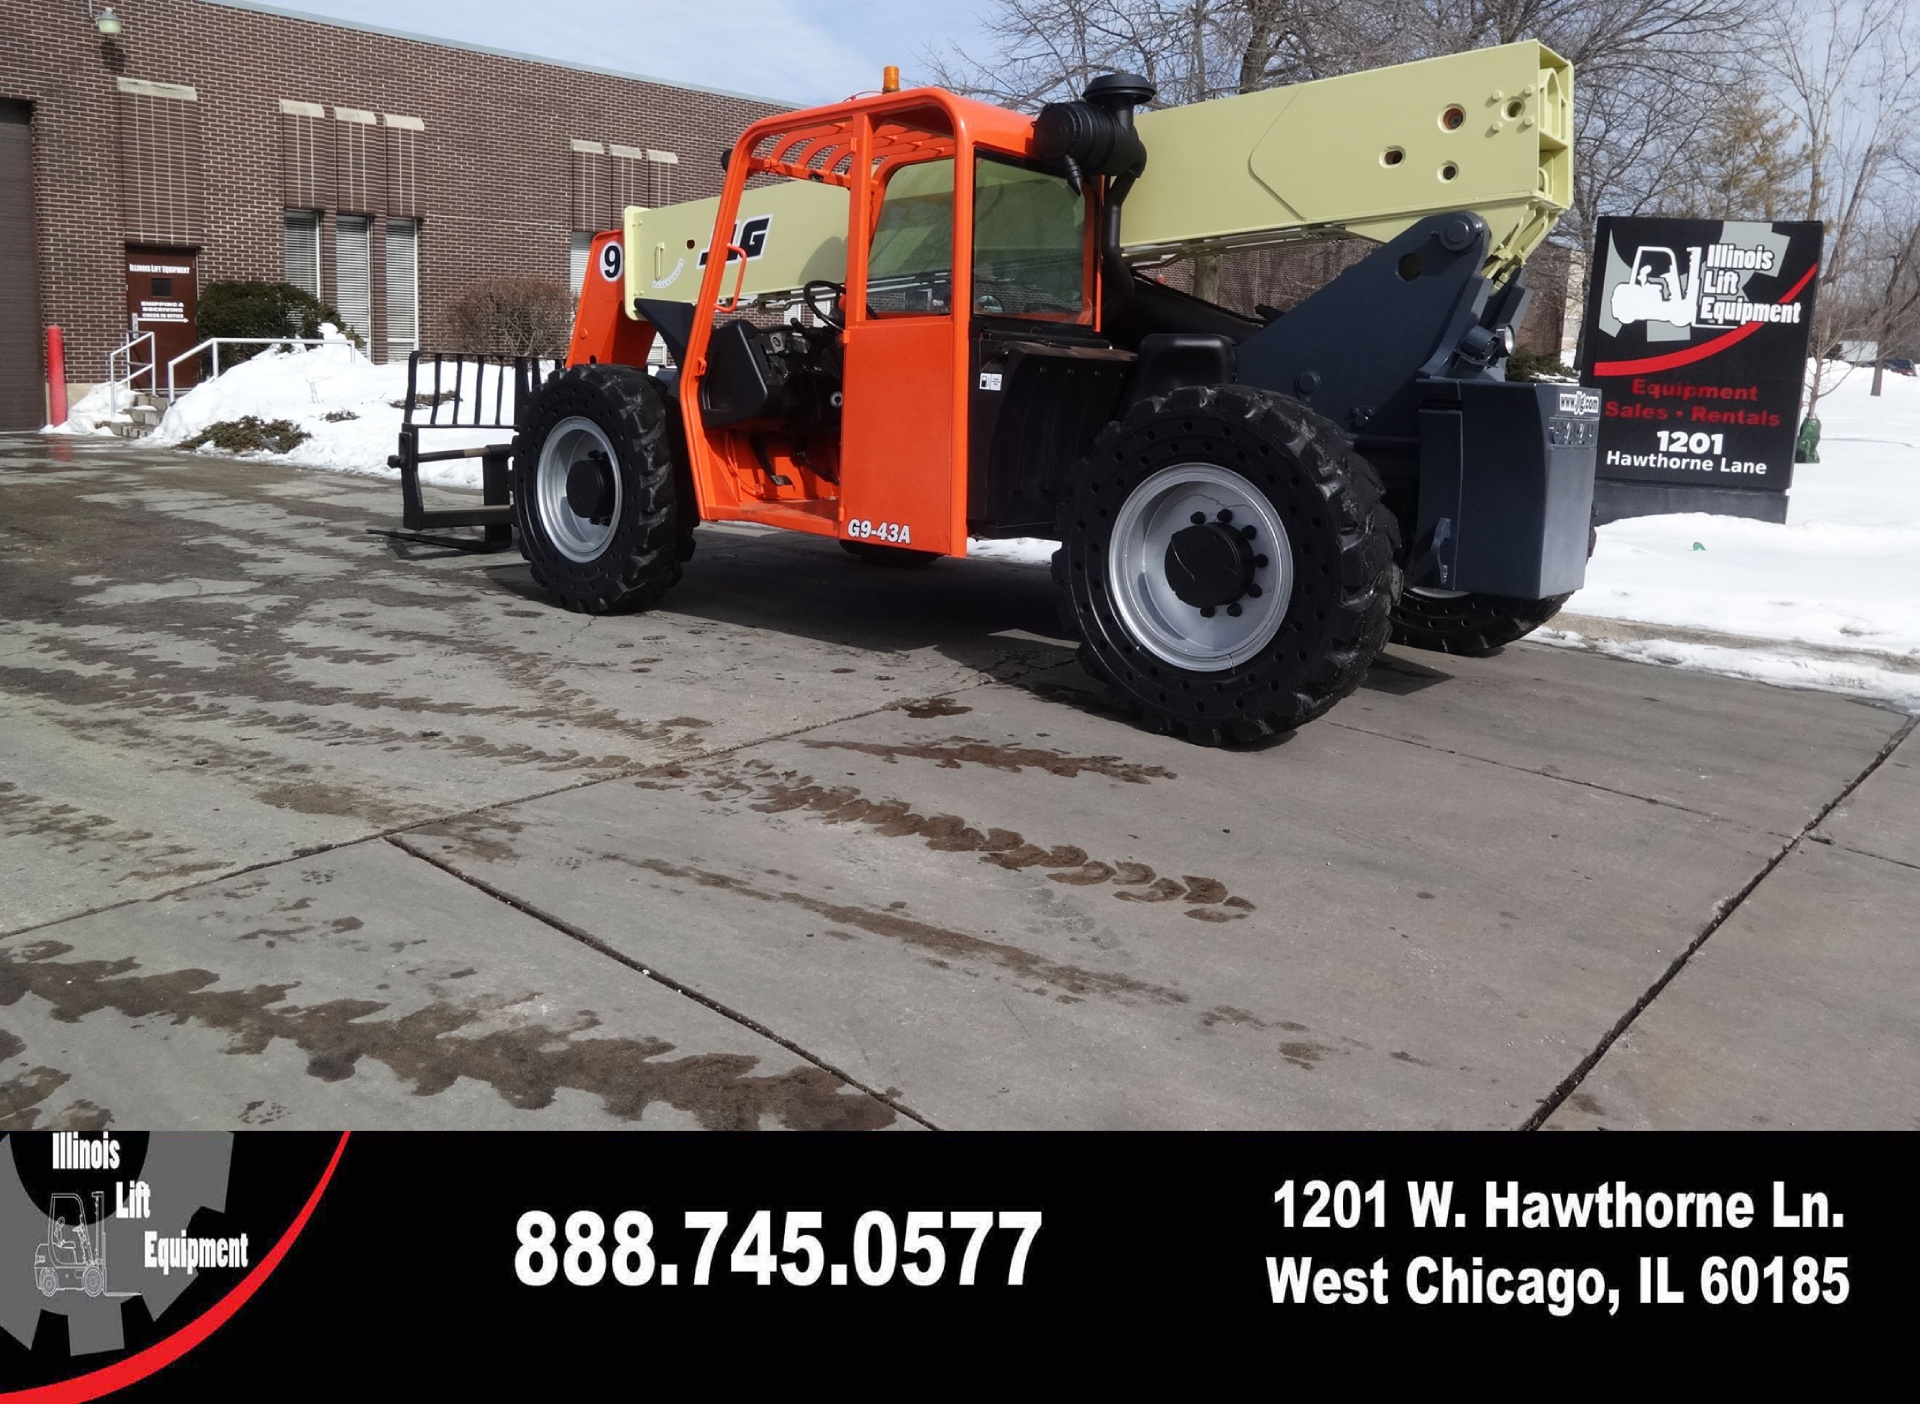 Used 2005 JLG G9-43A  | Cary, IL